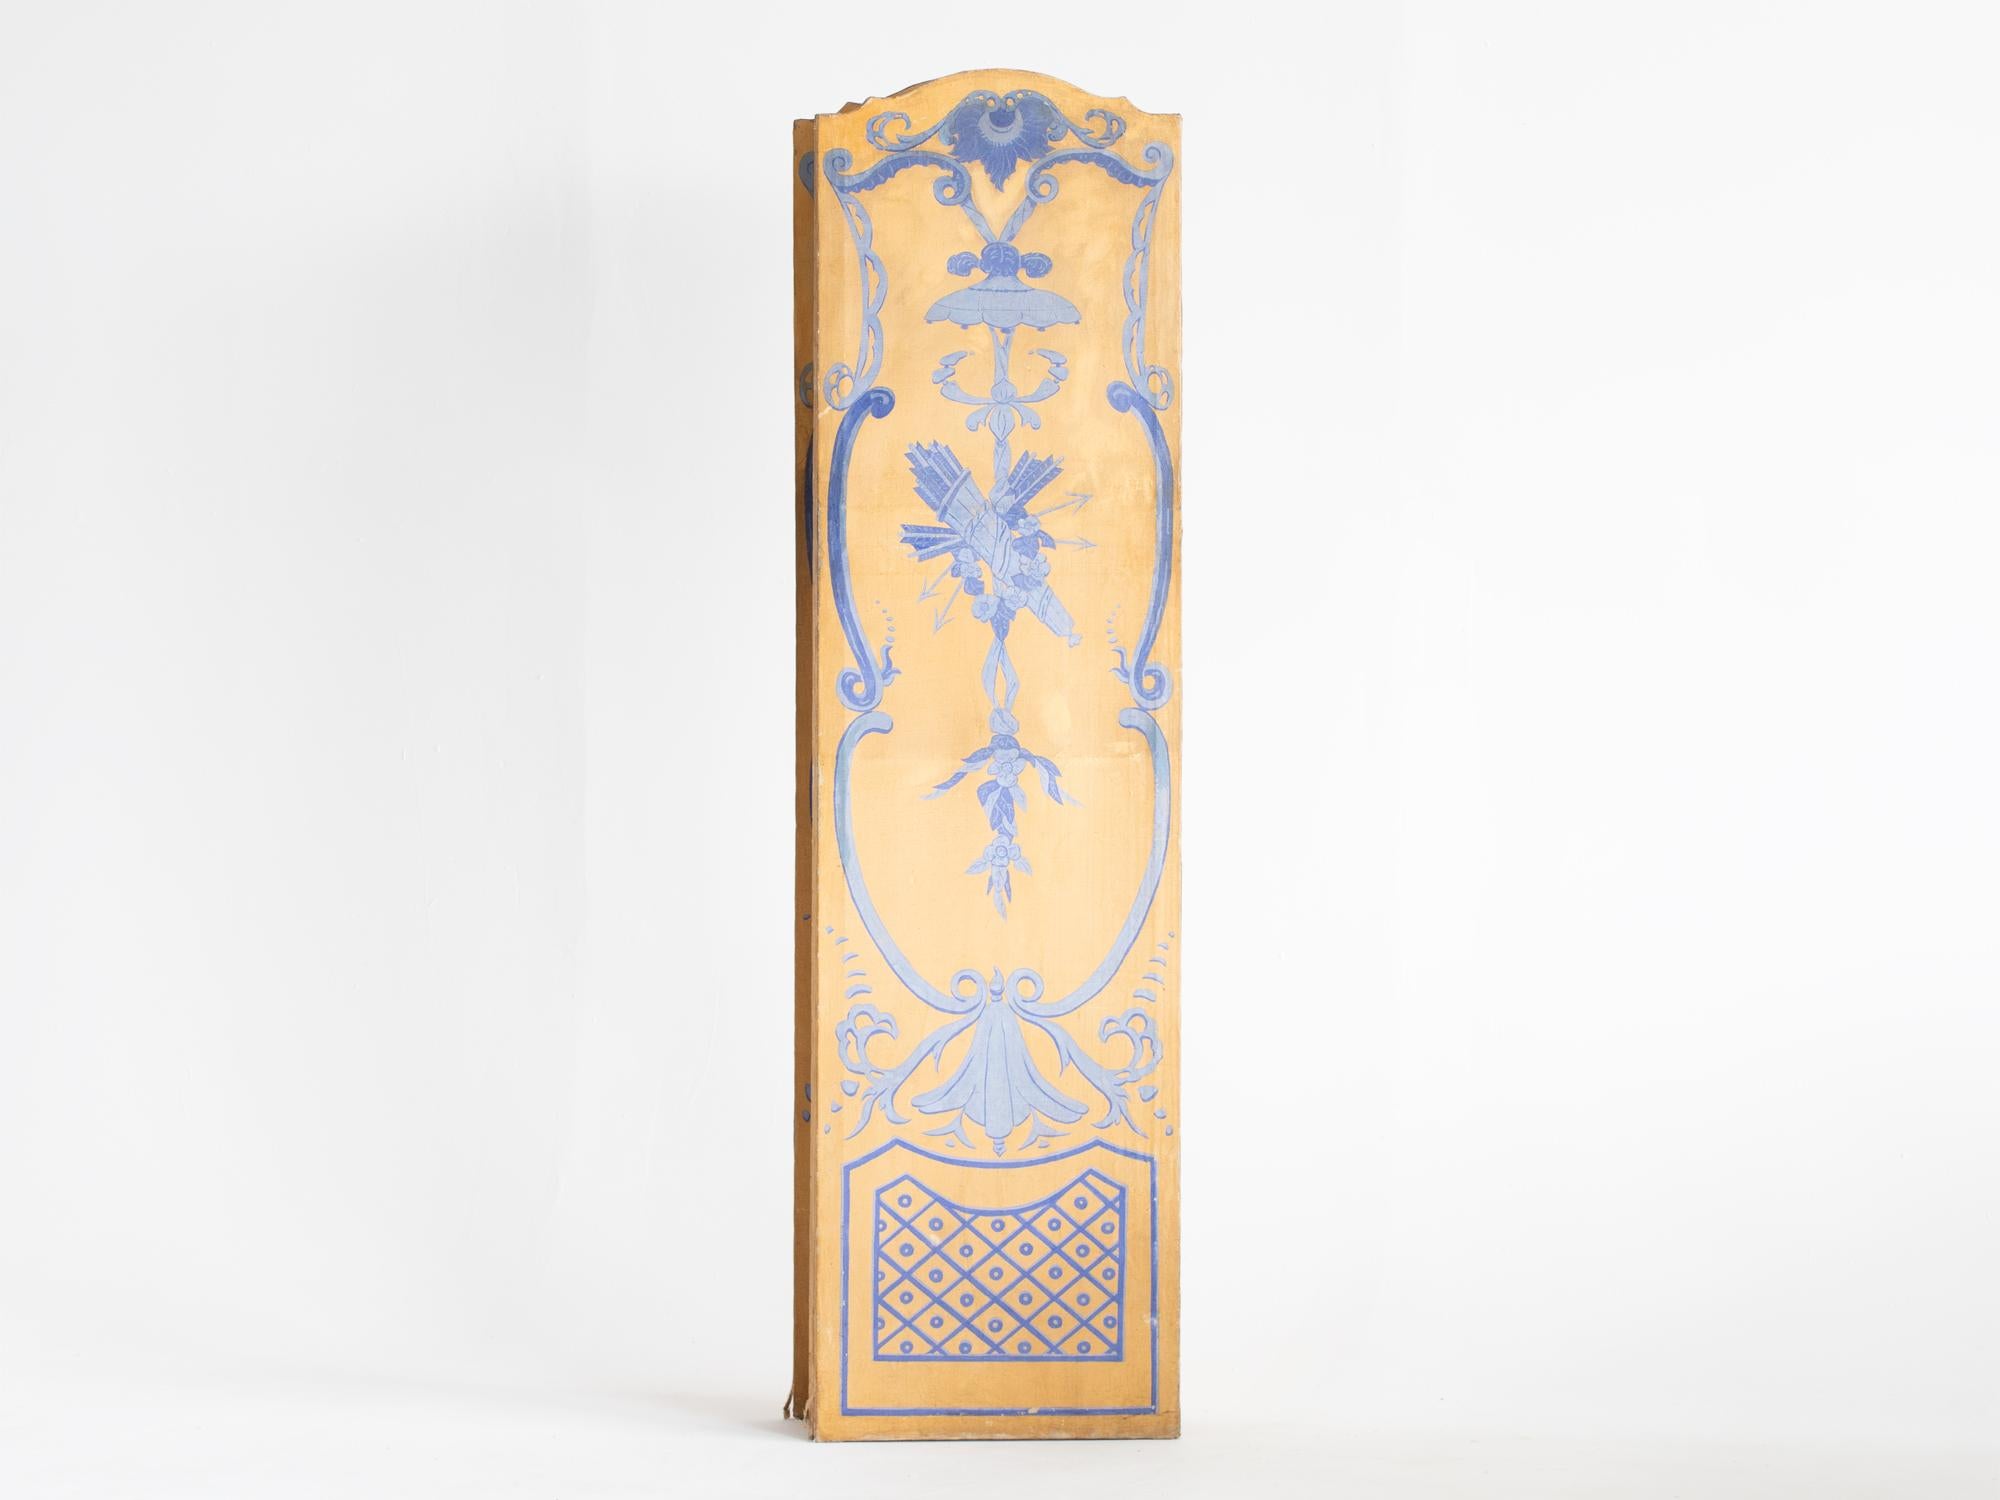 A three-fold screen or room divider with hand-painted neoclassical design. French with an Italian influence, late 18/early 19C.

Canvas stretched over a timber frame.

In very good order with colours remaining vibrant. Minor age-related wear with no